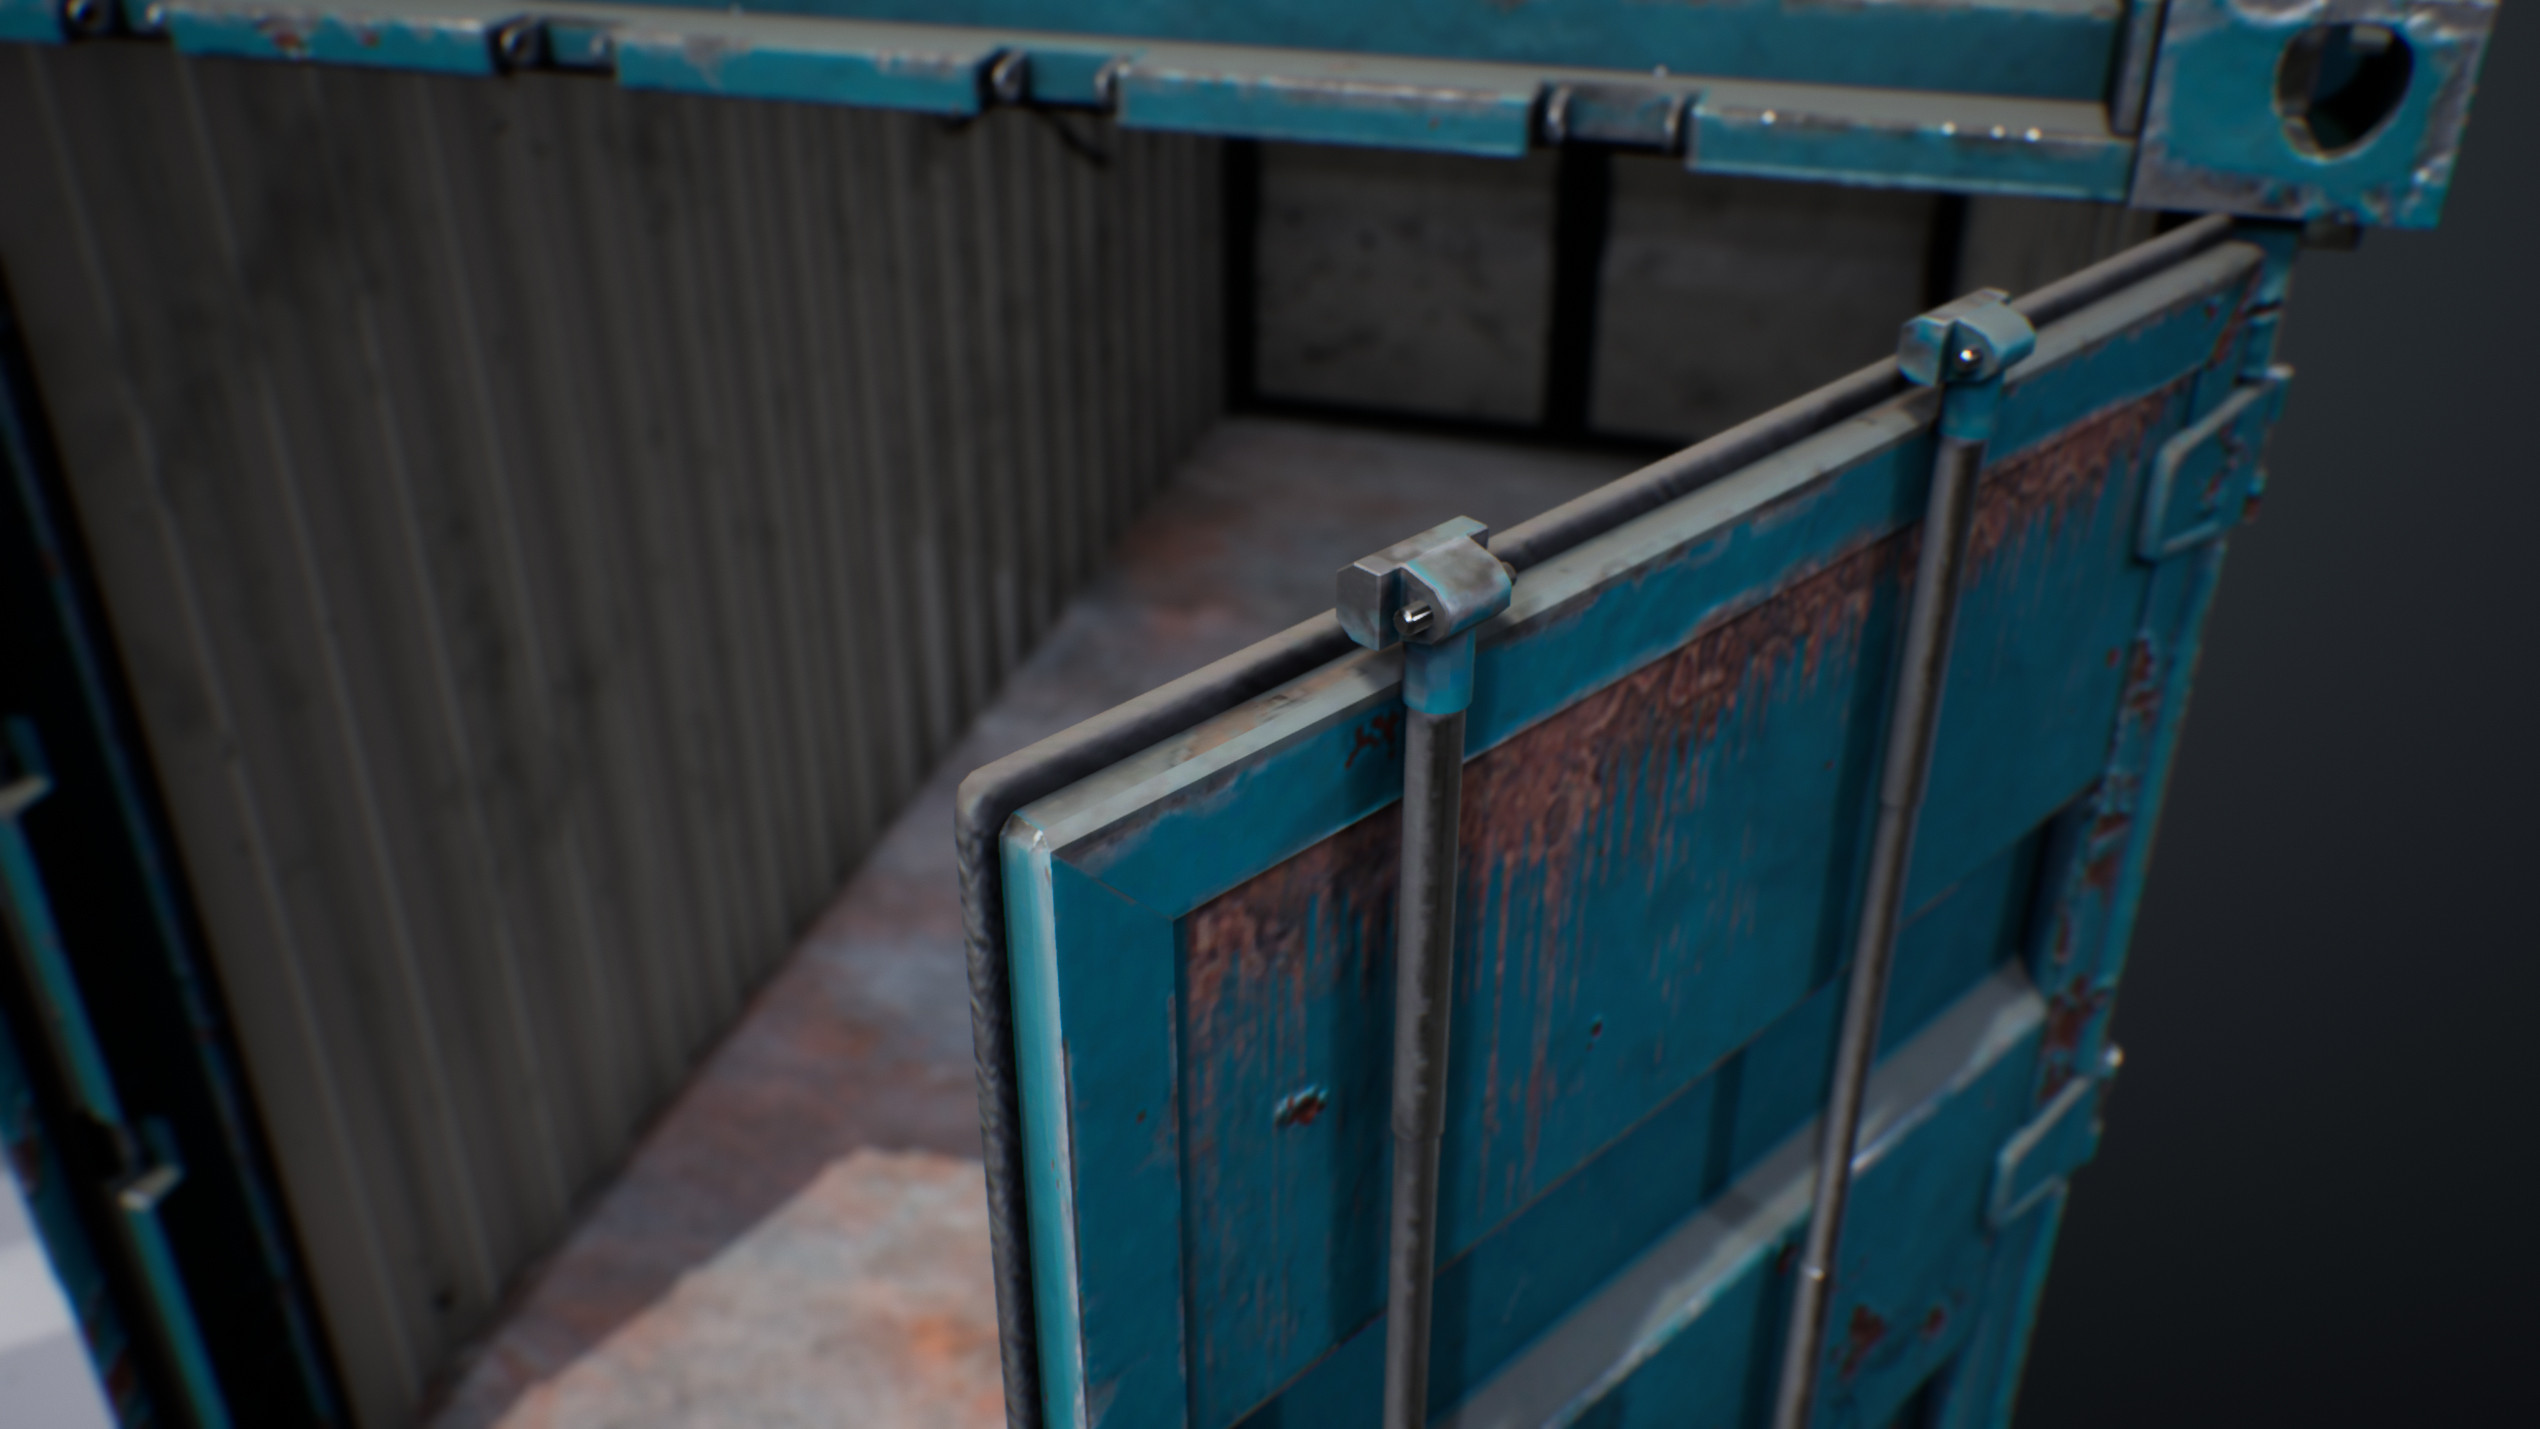 UE4 screenshot detailed shot of the container hinges 3.